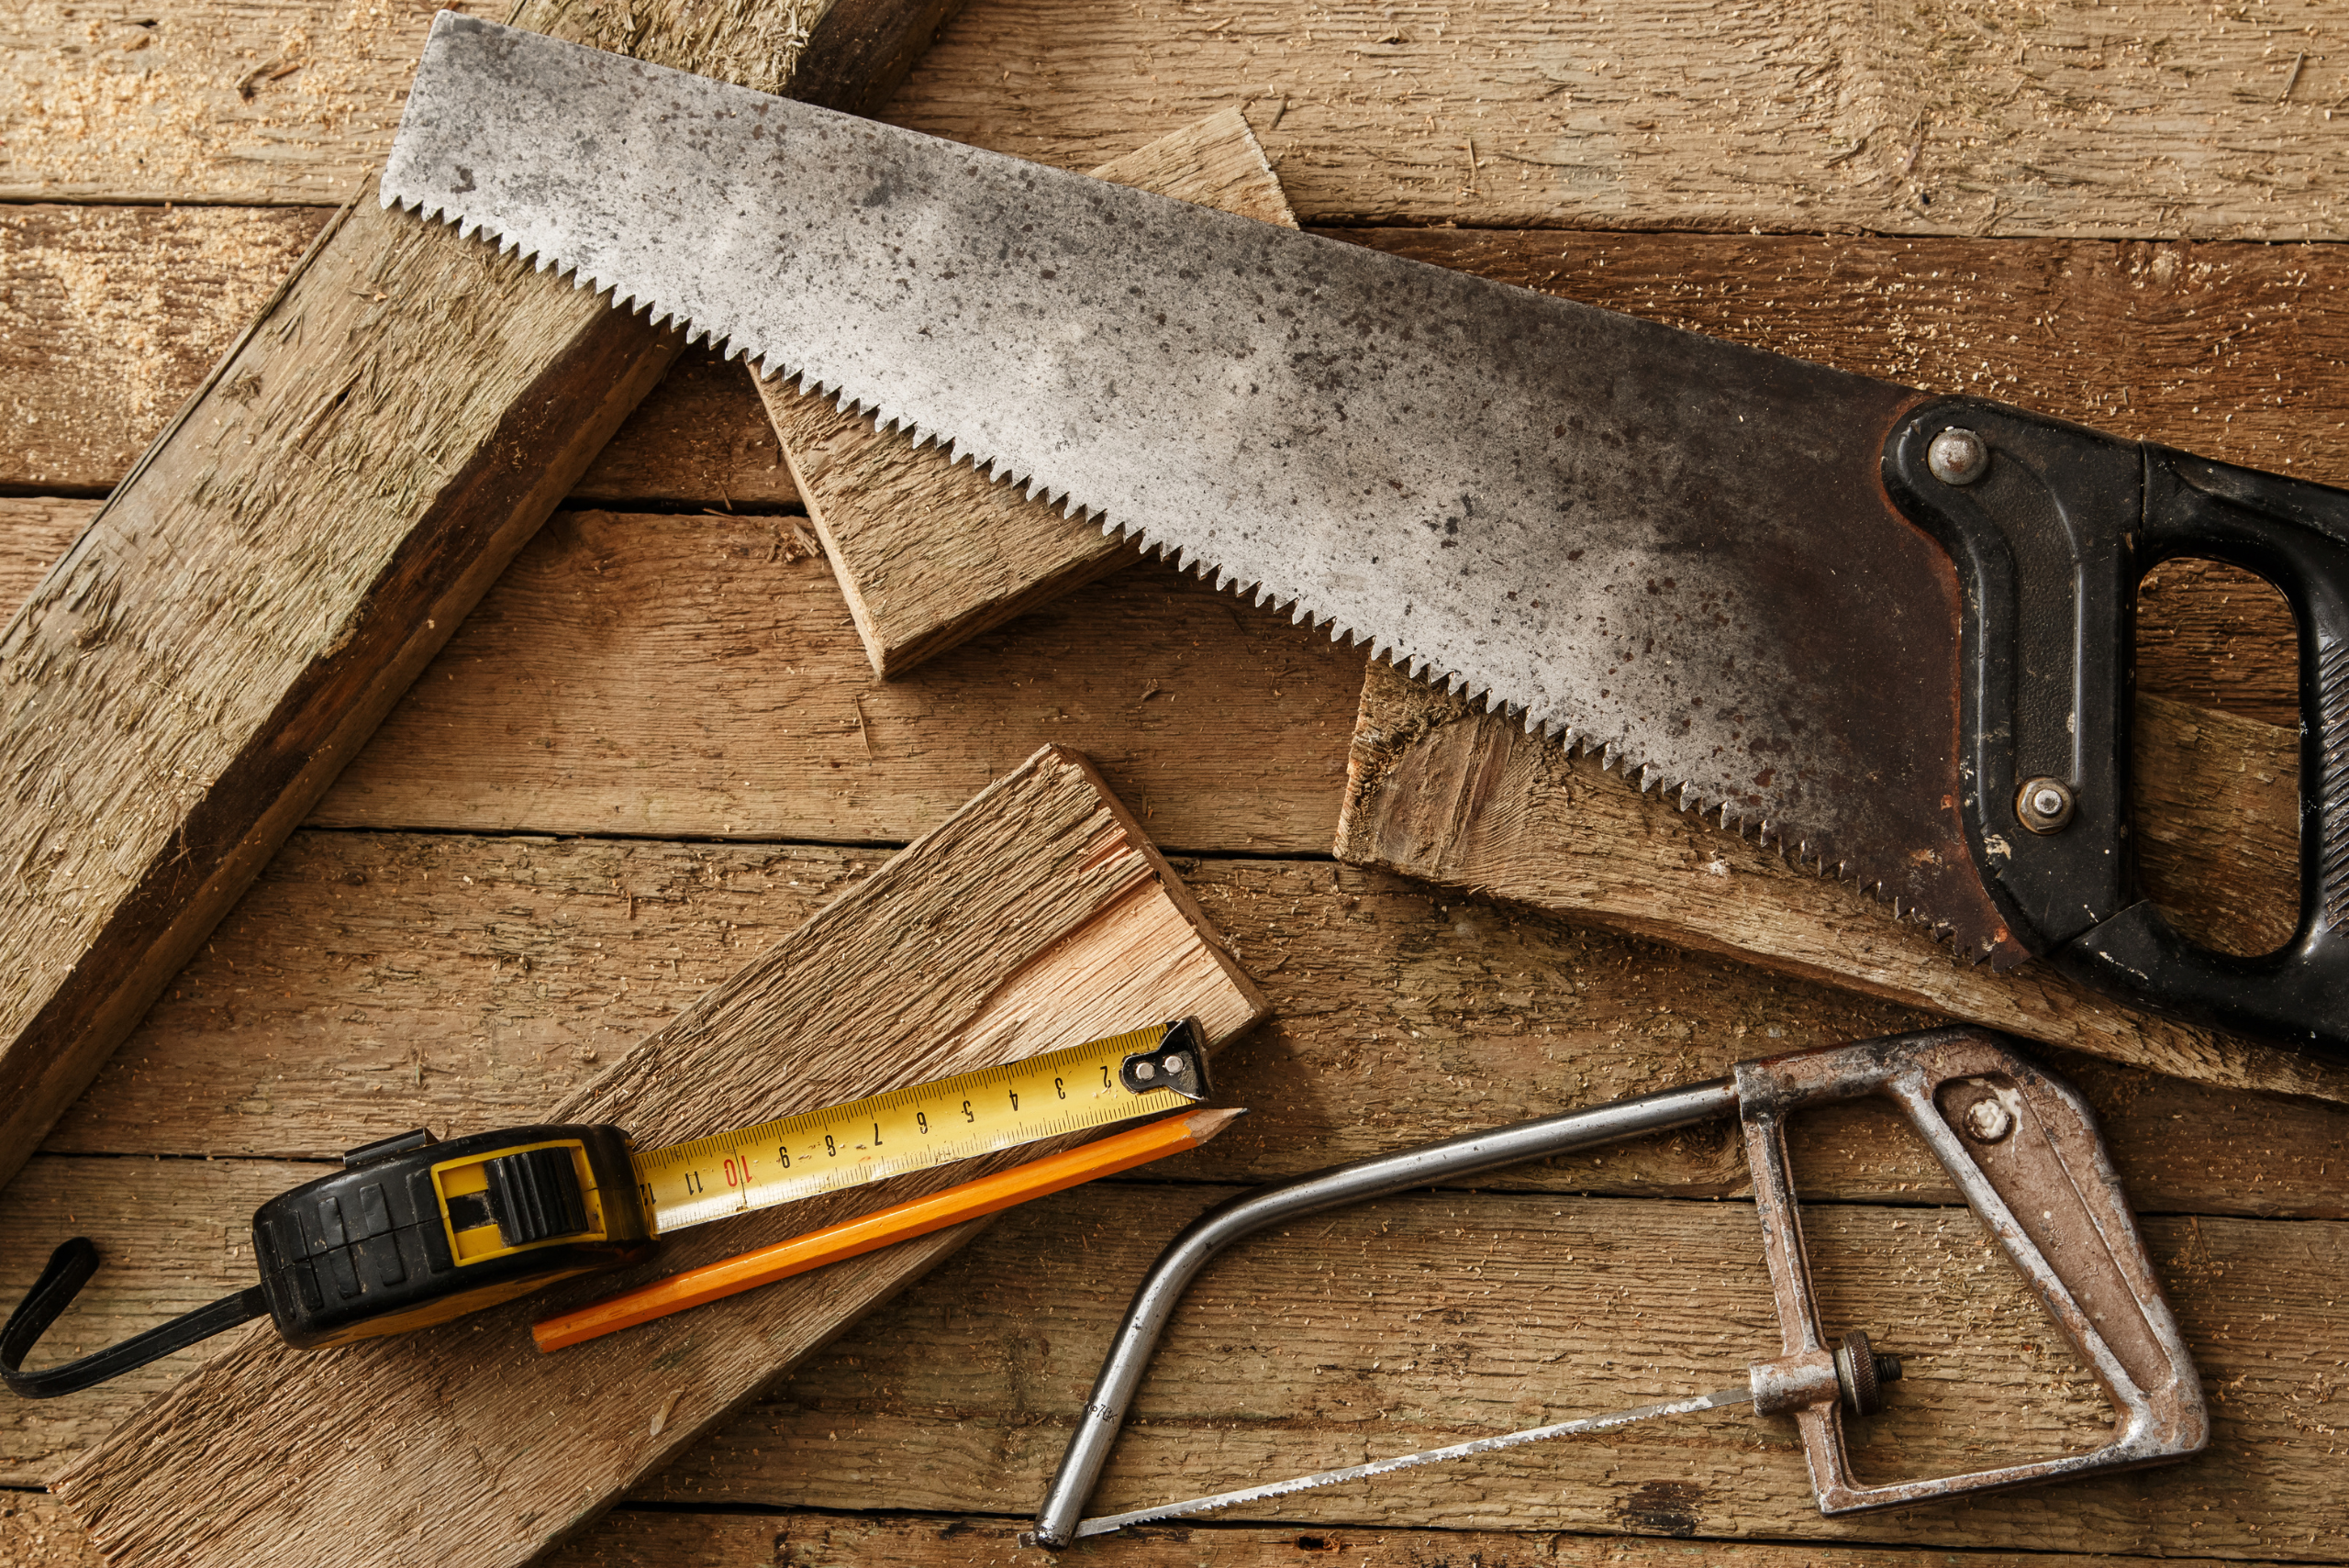 Saws and tools on top of wooden boards.